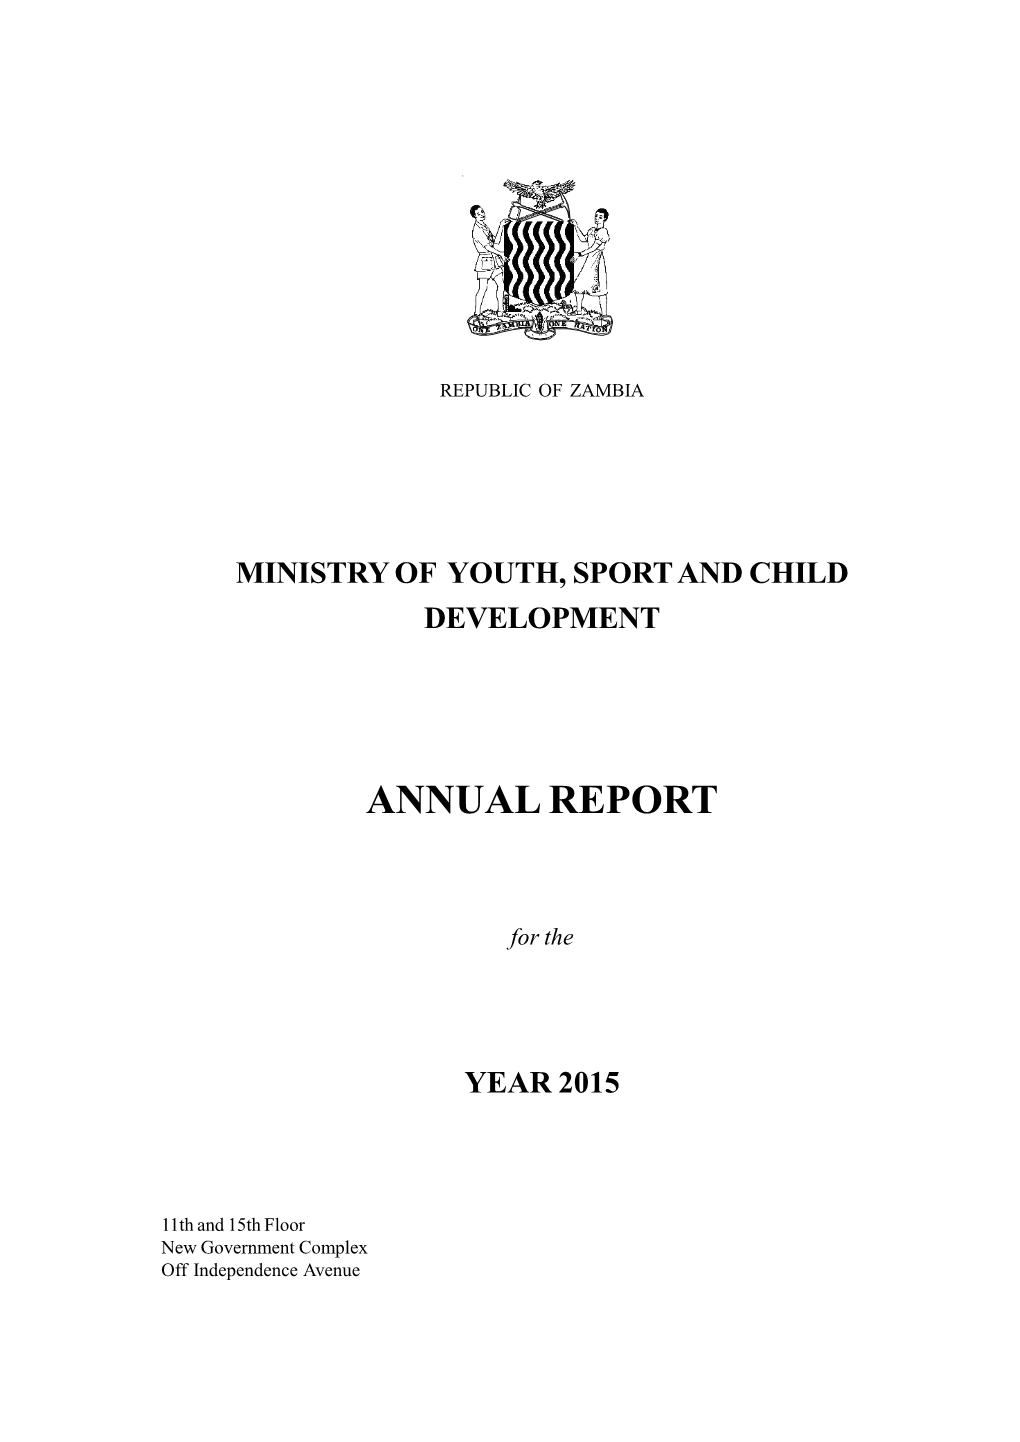 Ministry of Youth, Sport and Child Development--Annual Report, 2015